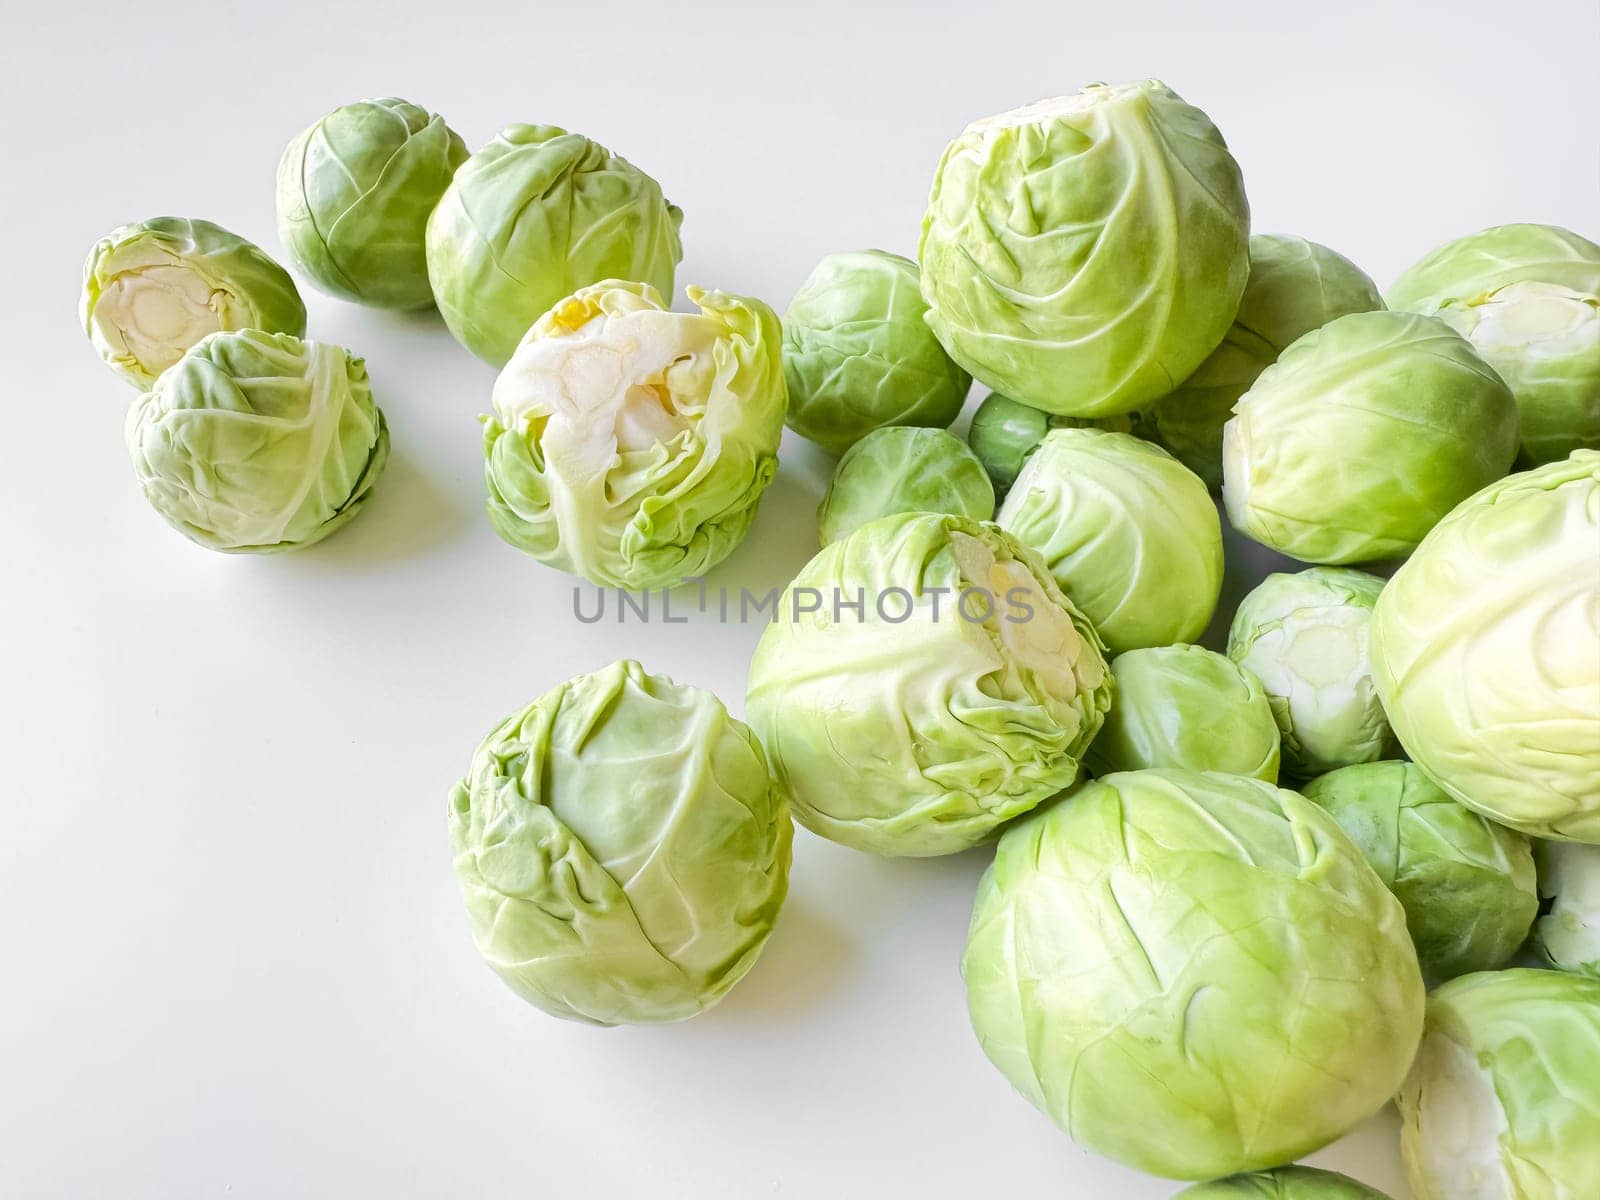 Fresh Brussels sprouts on white background, healthy green vegetable concept with copy space. High quality photo